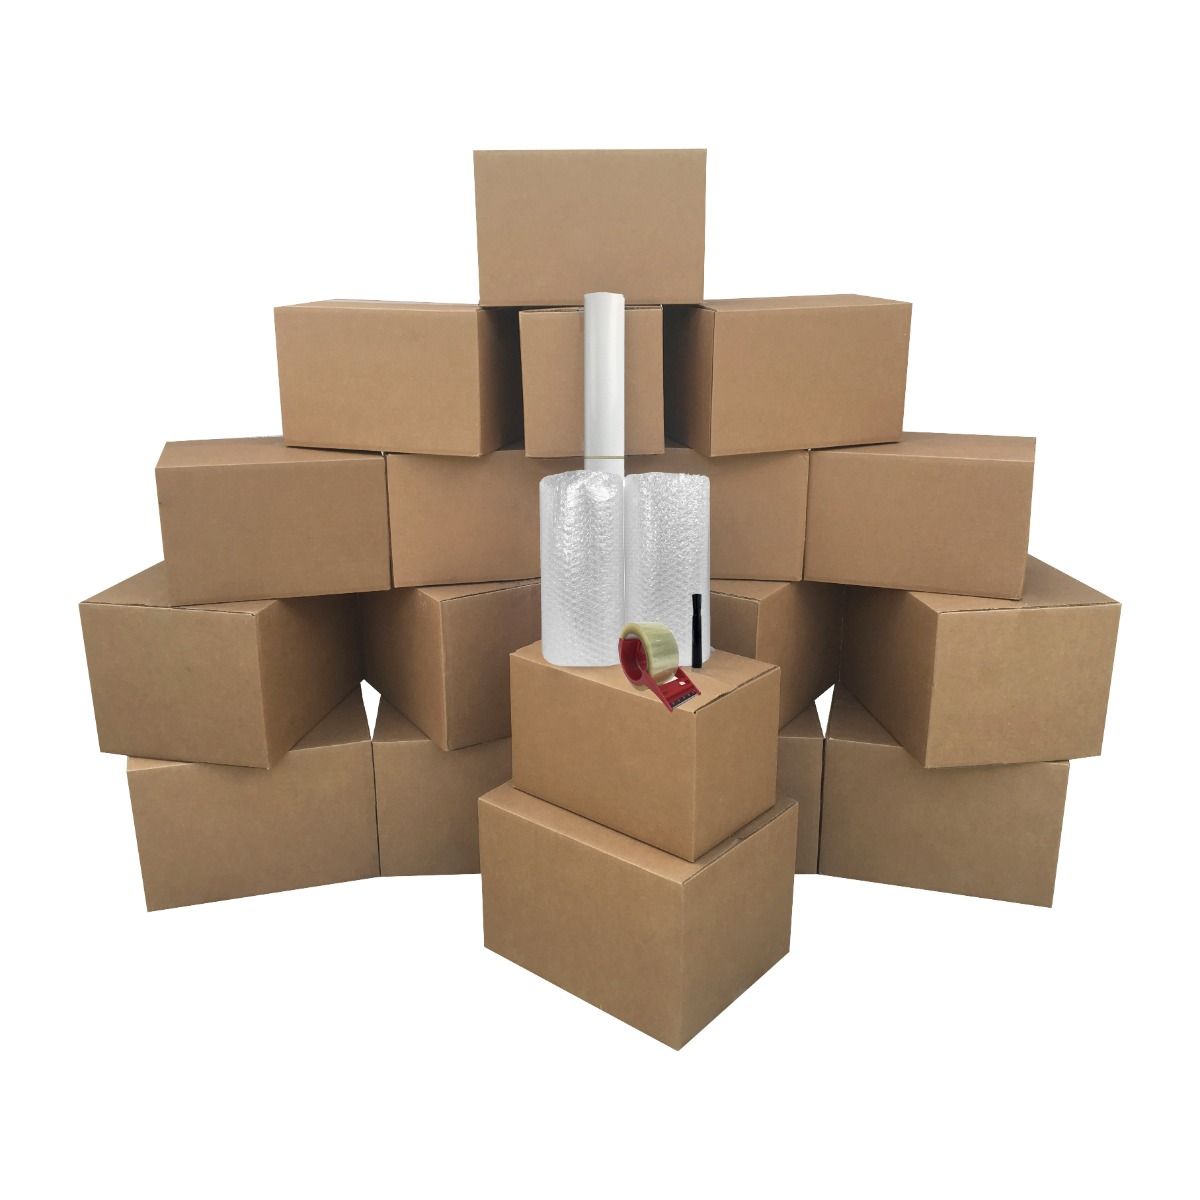 Moving Supplies • Packing Materials • Equipment